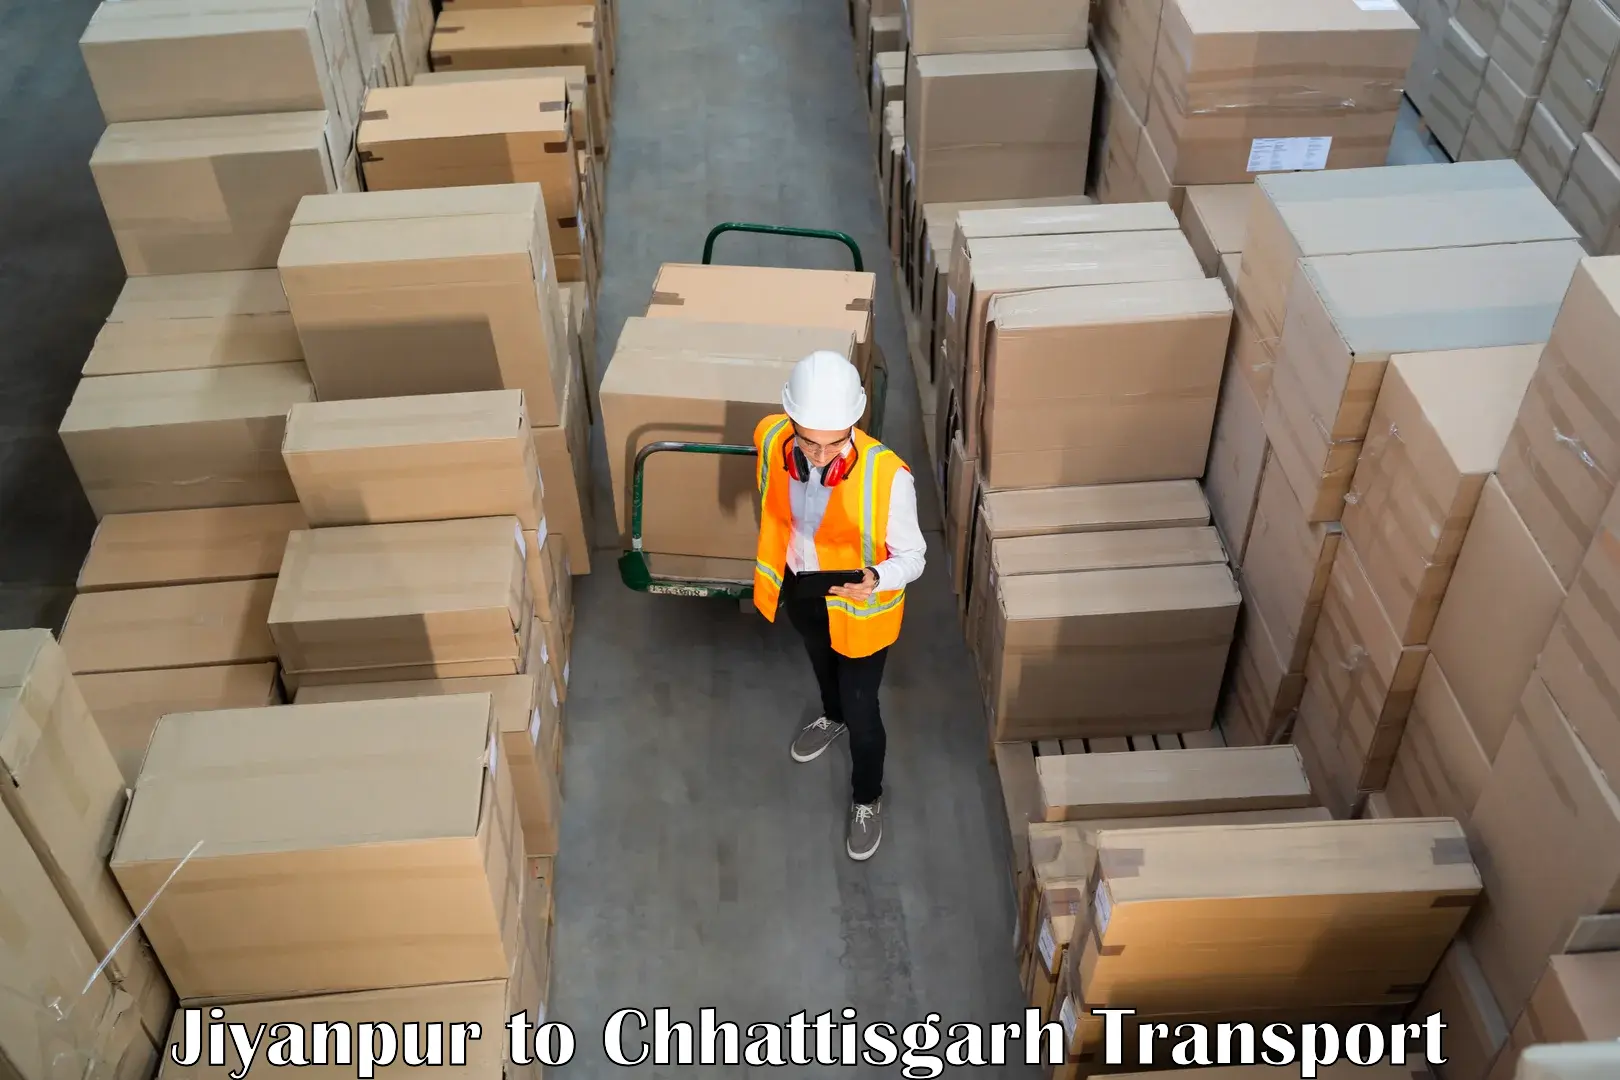 Parcel transport services Jiyanpur to Dhamtari